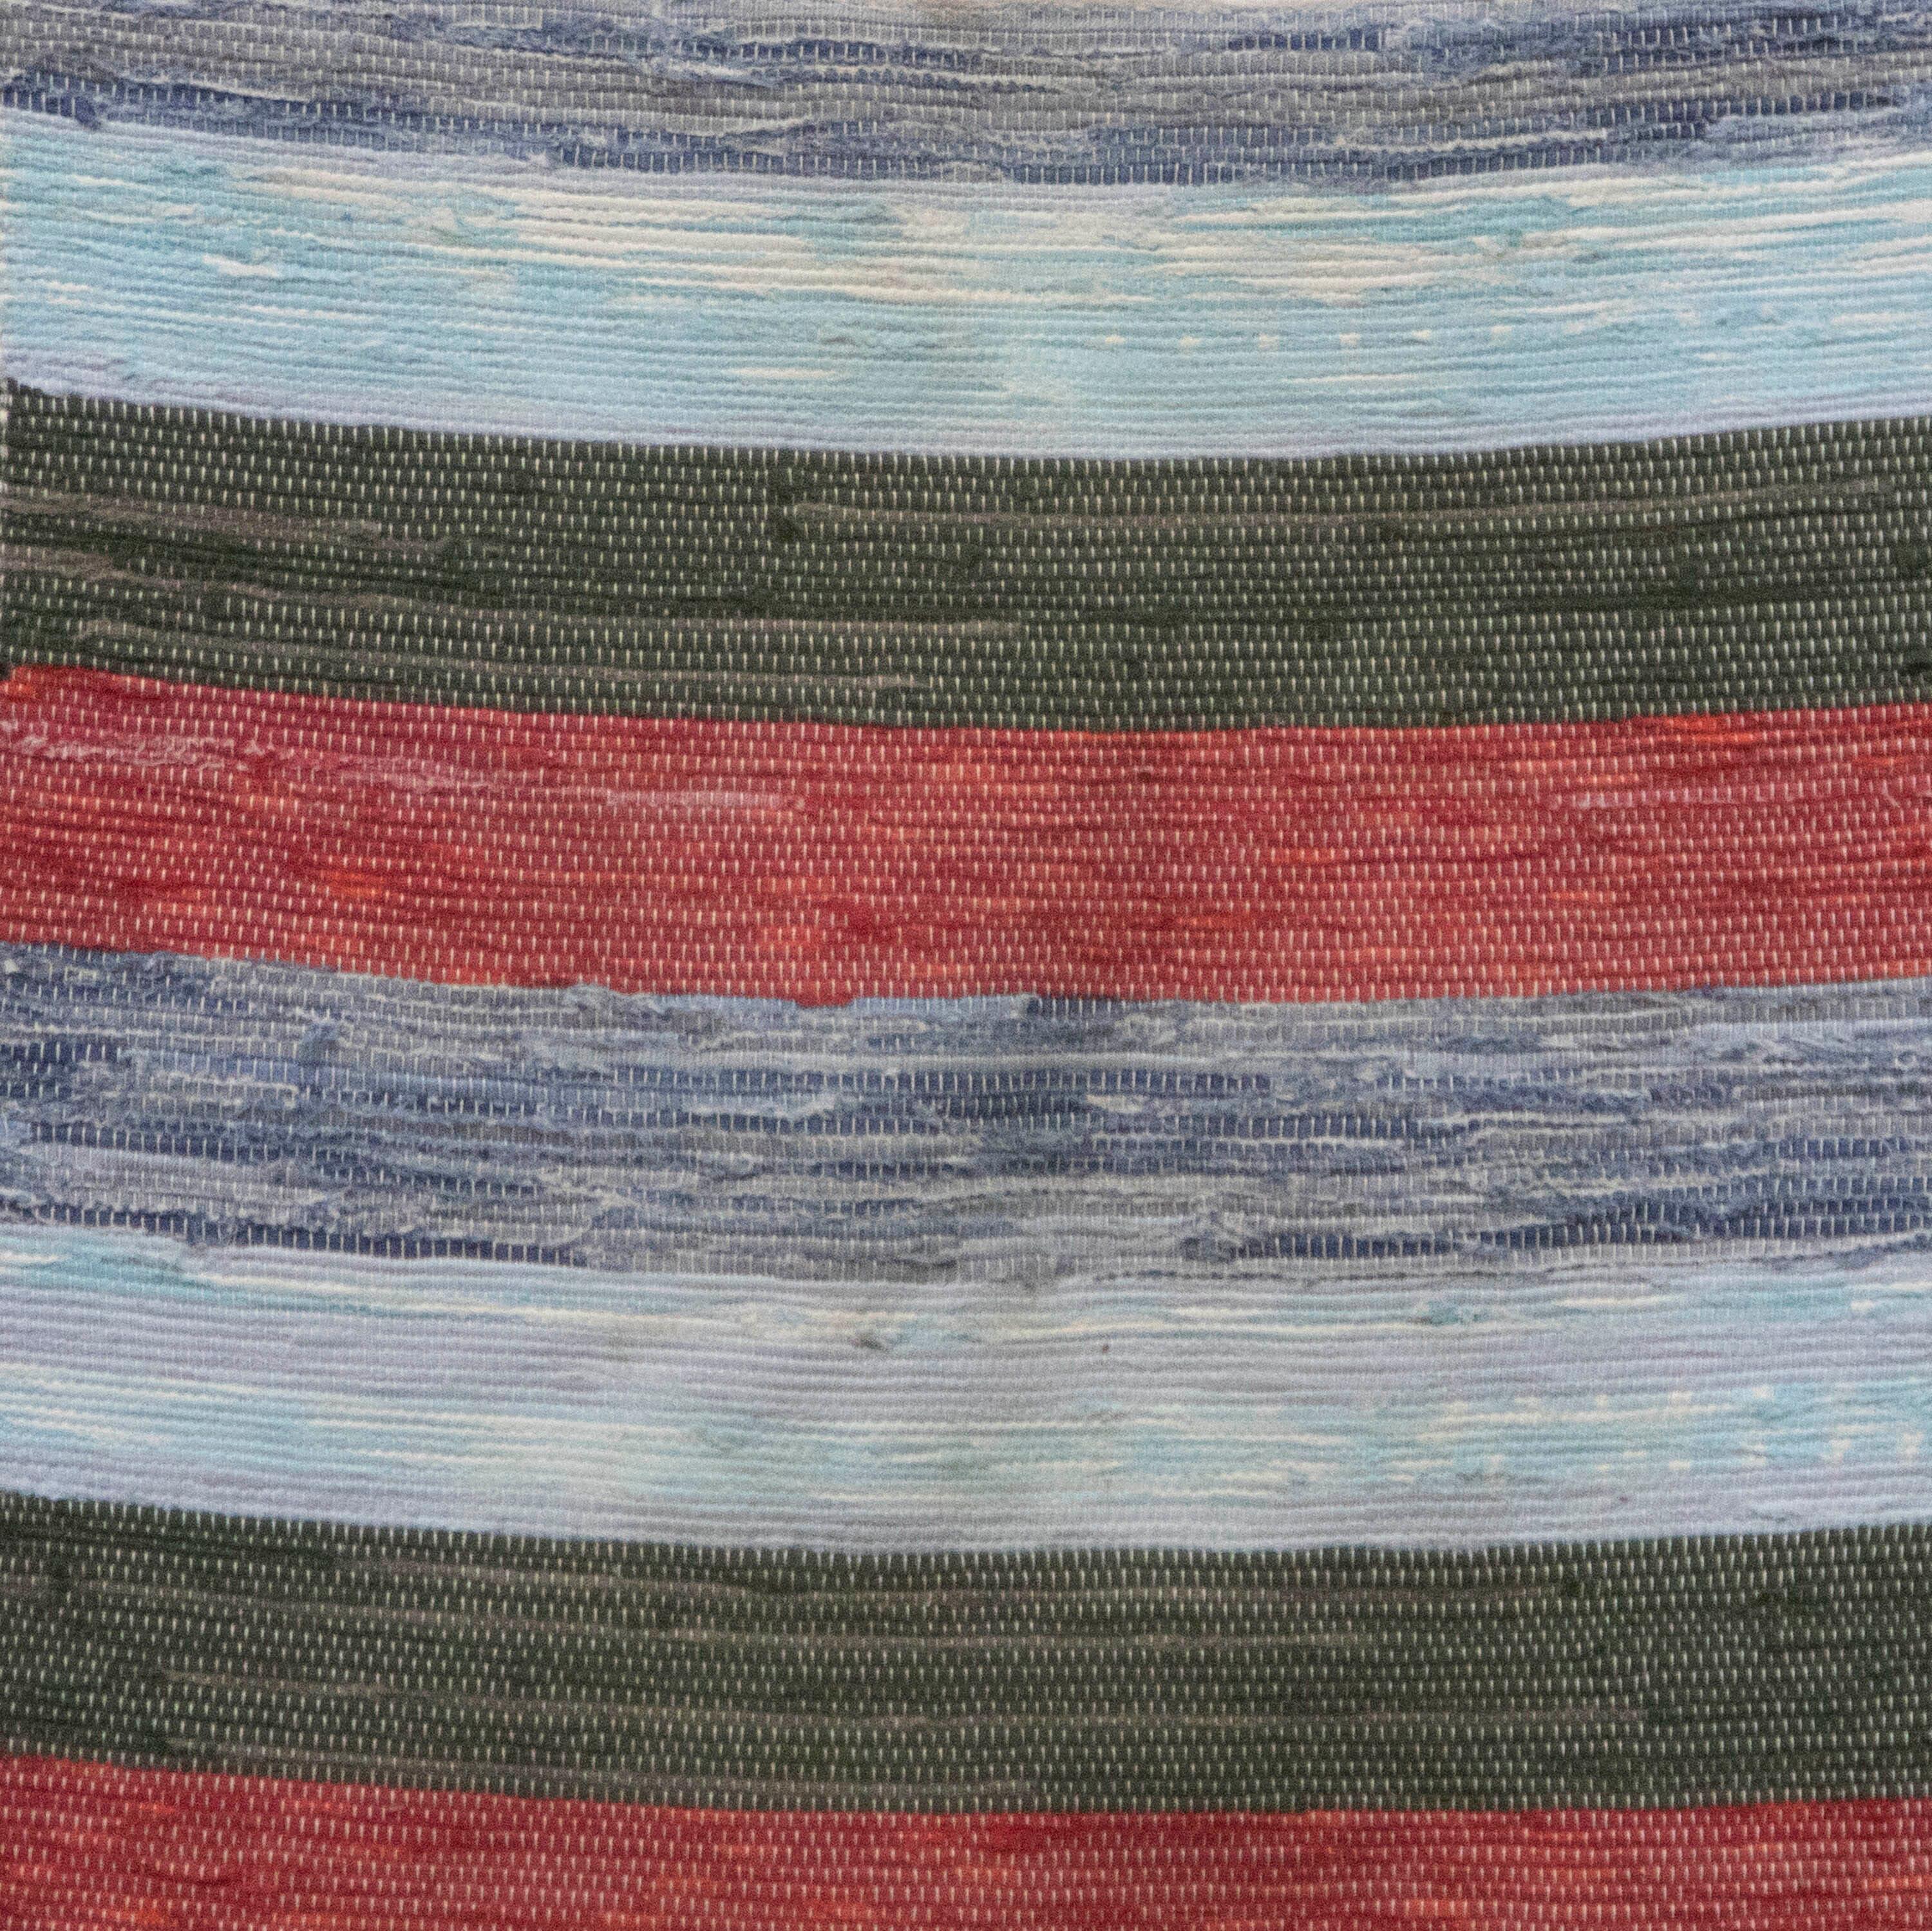 20th century Swedish rag rug. Featuring a large stripe design throughout in tones of green, blue, red, and aqua. This rug can be machine-washed at 30 degrees.
RT6024608.